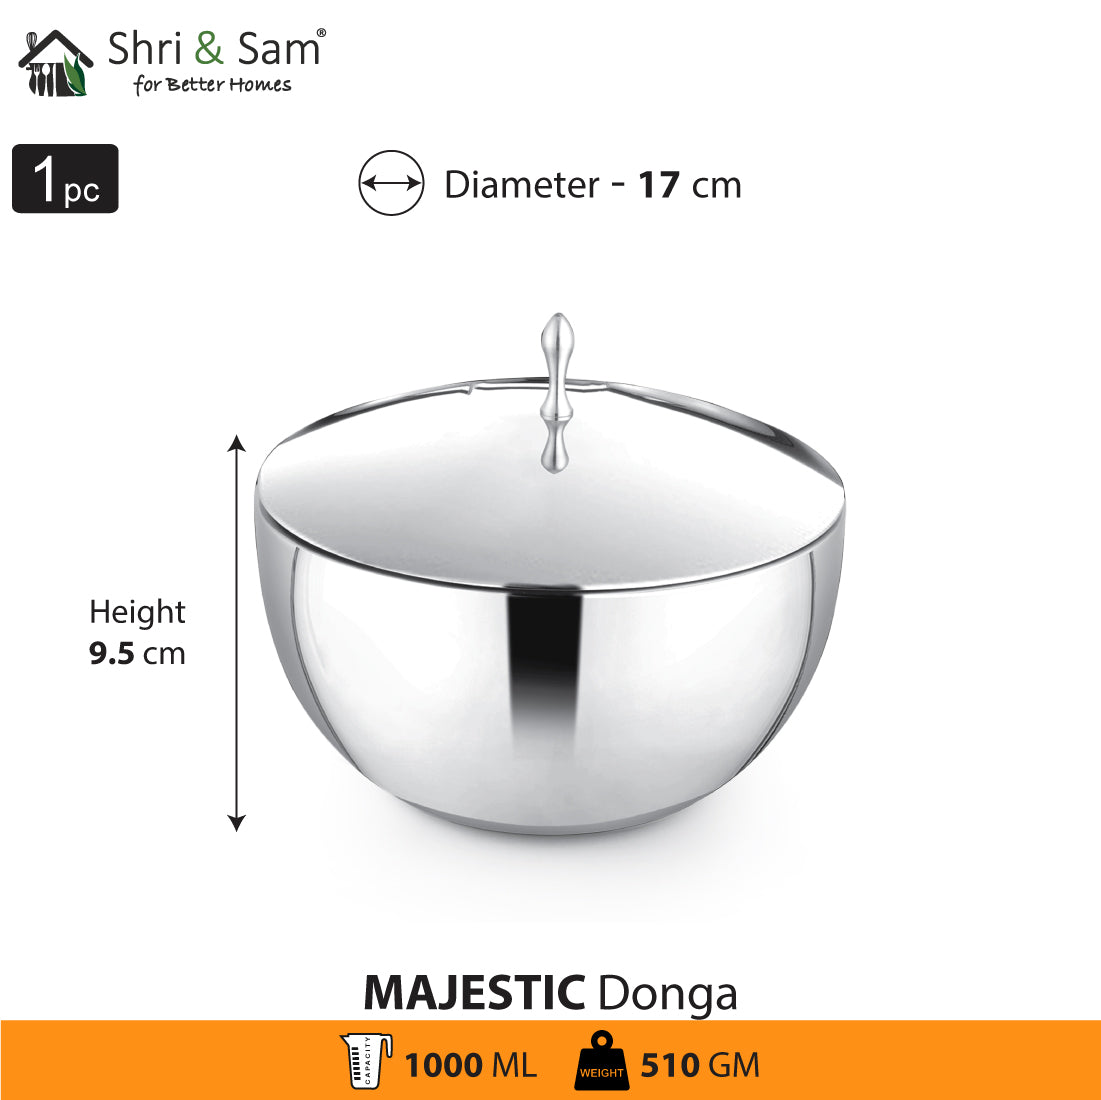 Stainless Steel Double Wall Donga Majestic